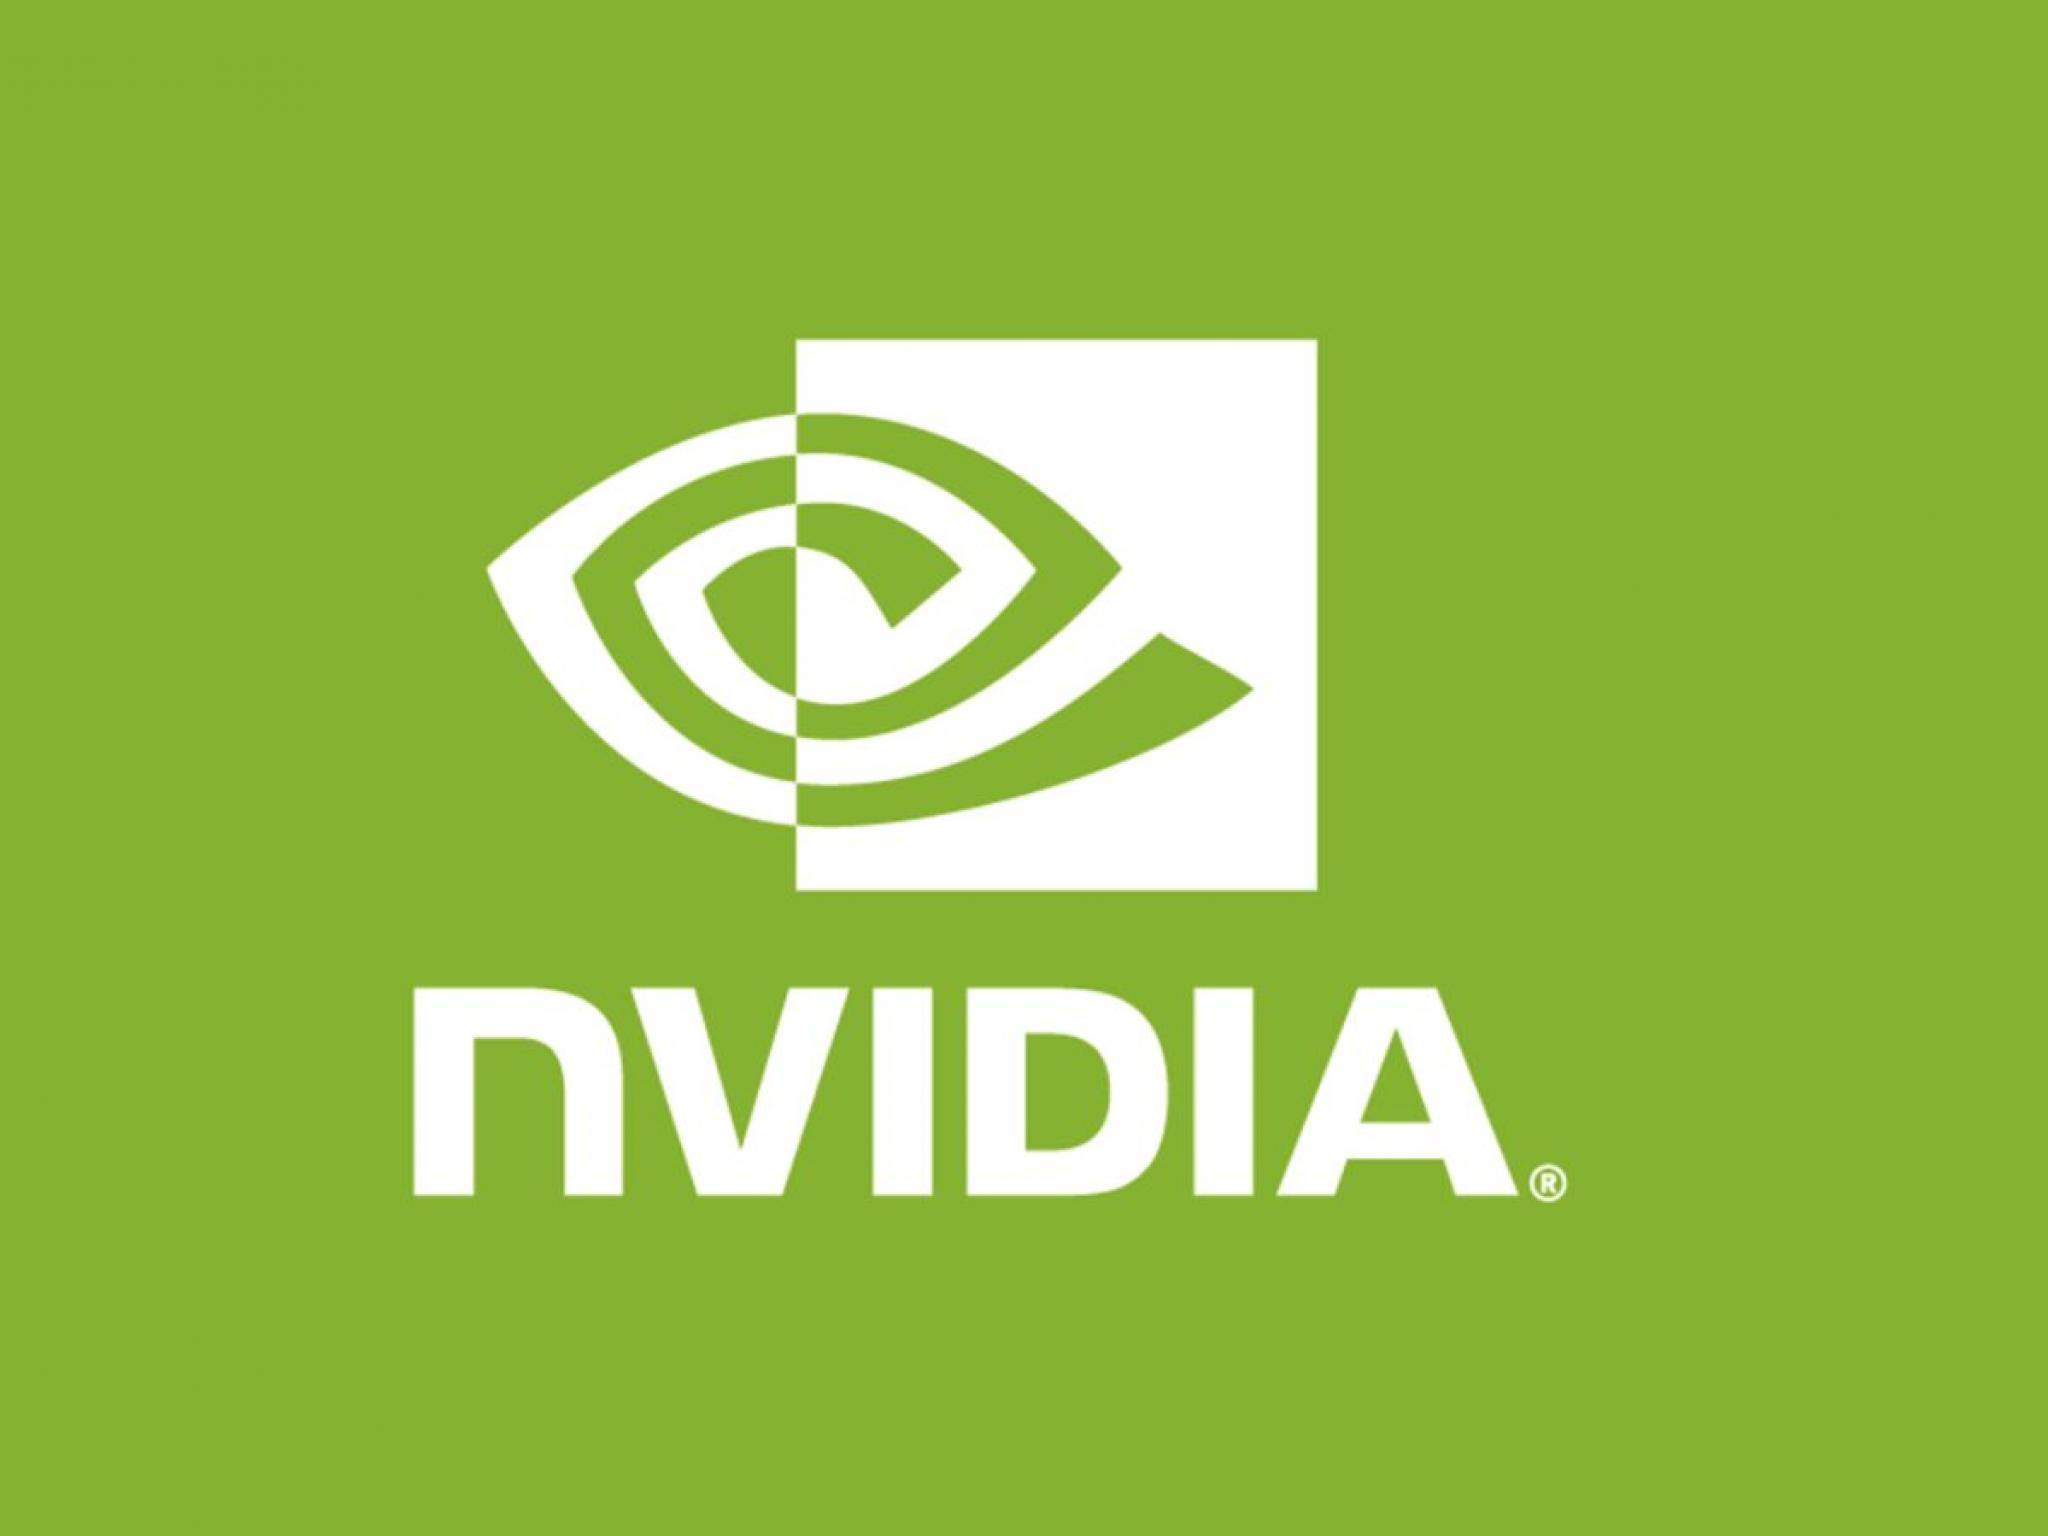  nvidia-to-rally-over-17-here-are-10-other-analyst-forecasts-for-friday 